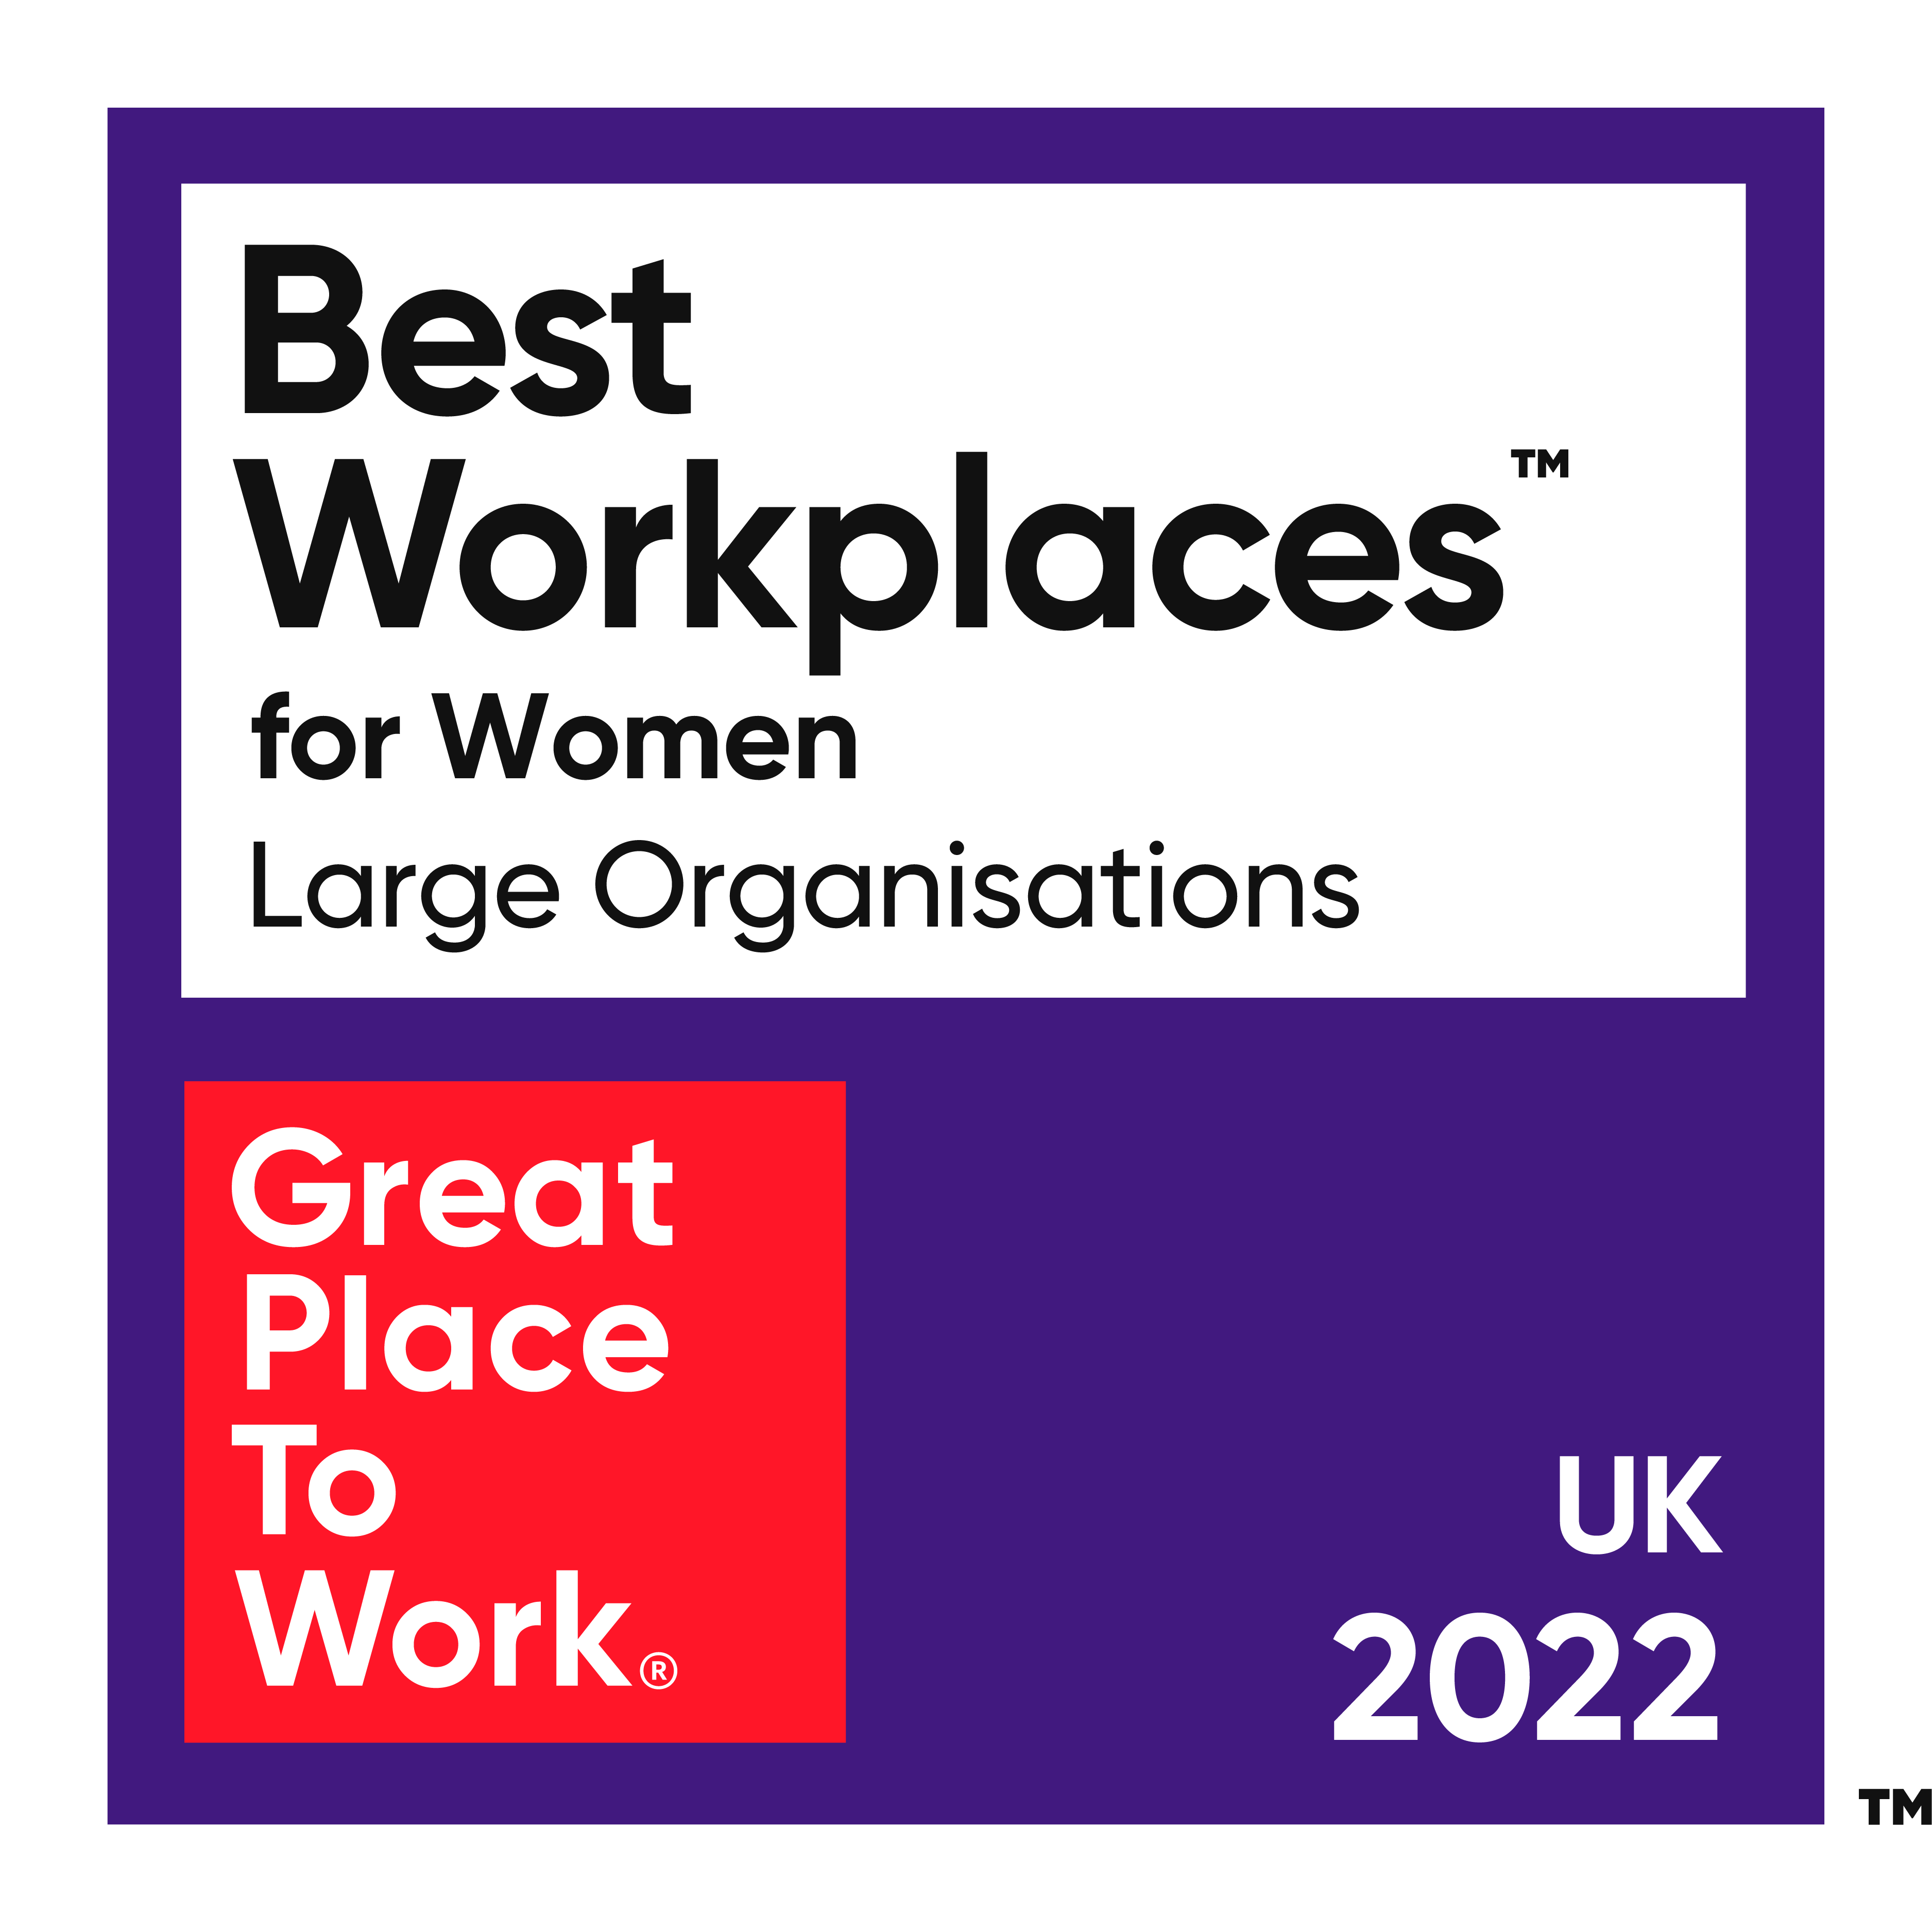 Great Place to Work Best Workplaces for Women Large Organisations Award Twenty Twenty-Two